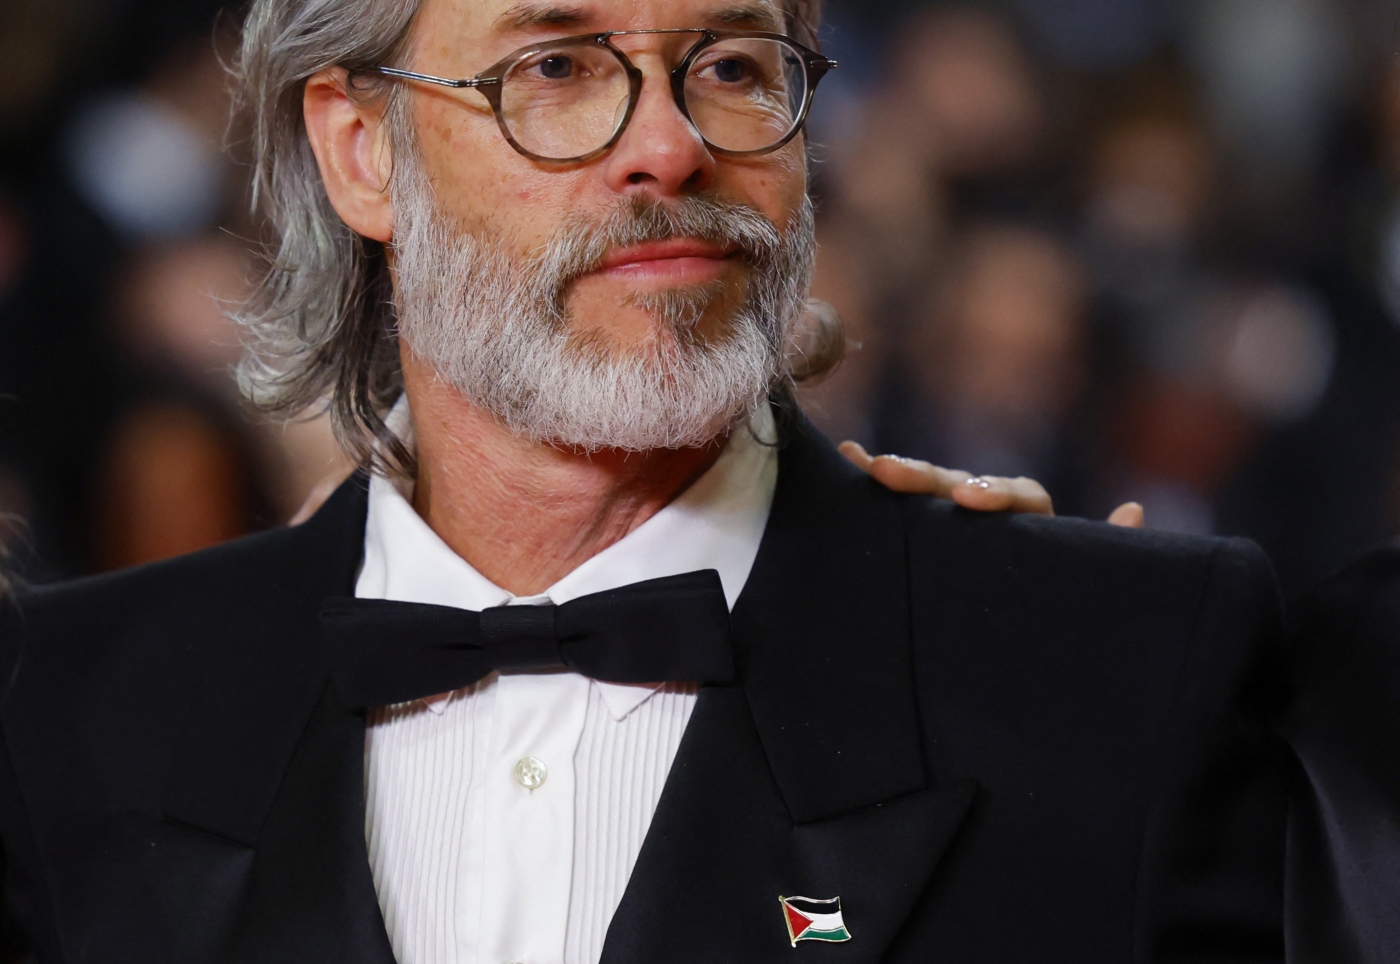 Cannes Film Festival Outrage after magazine edits out Guy Pearce's